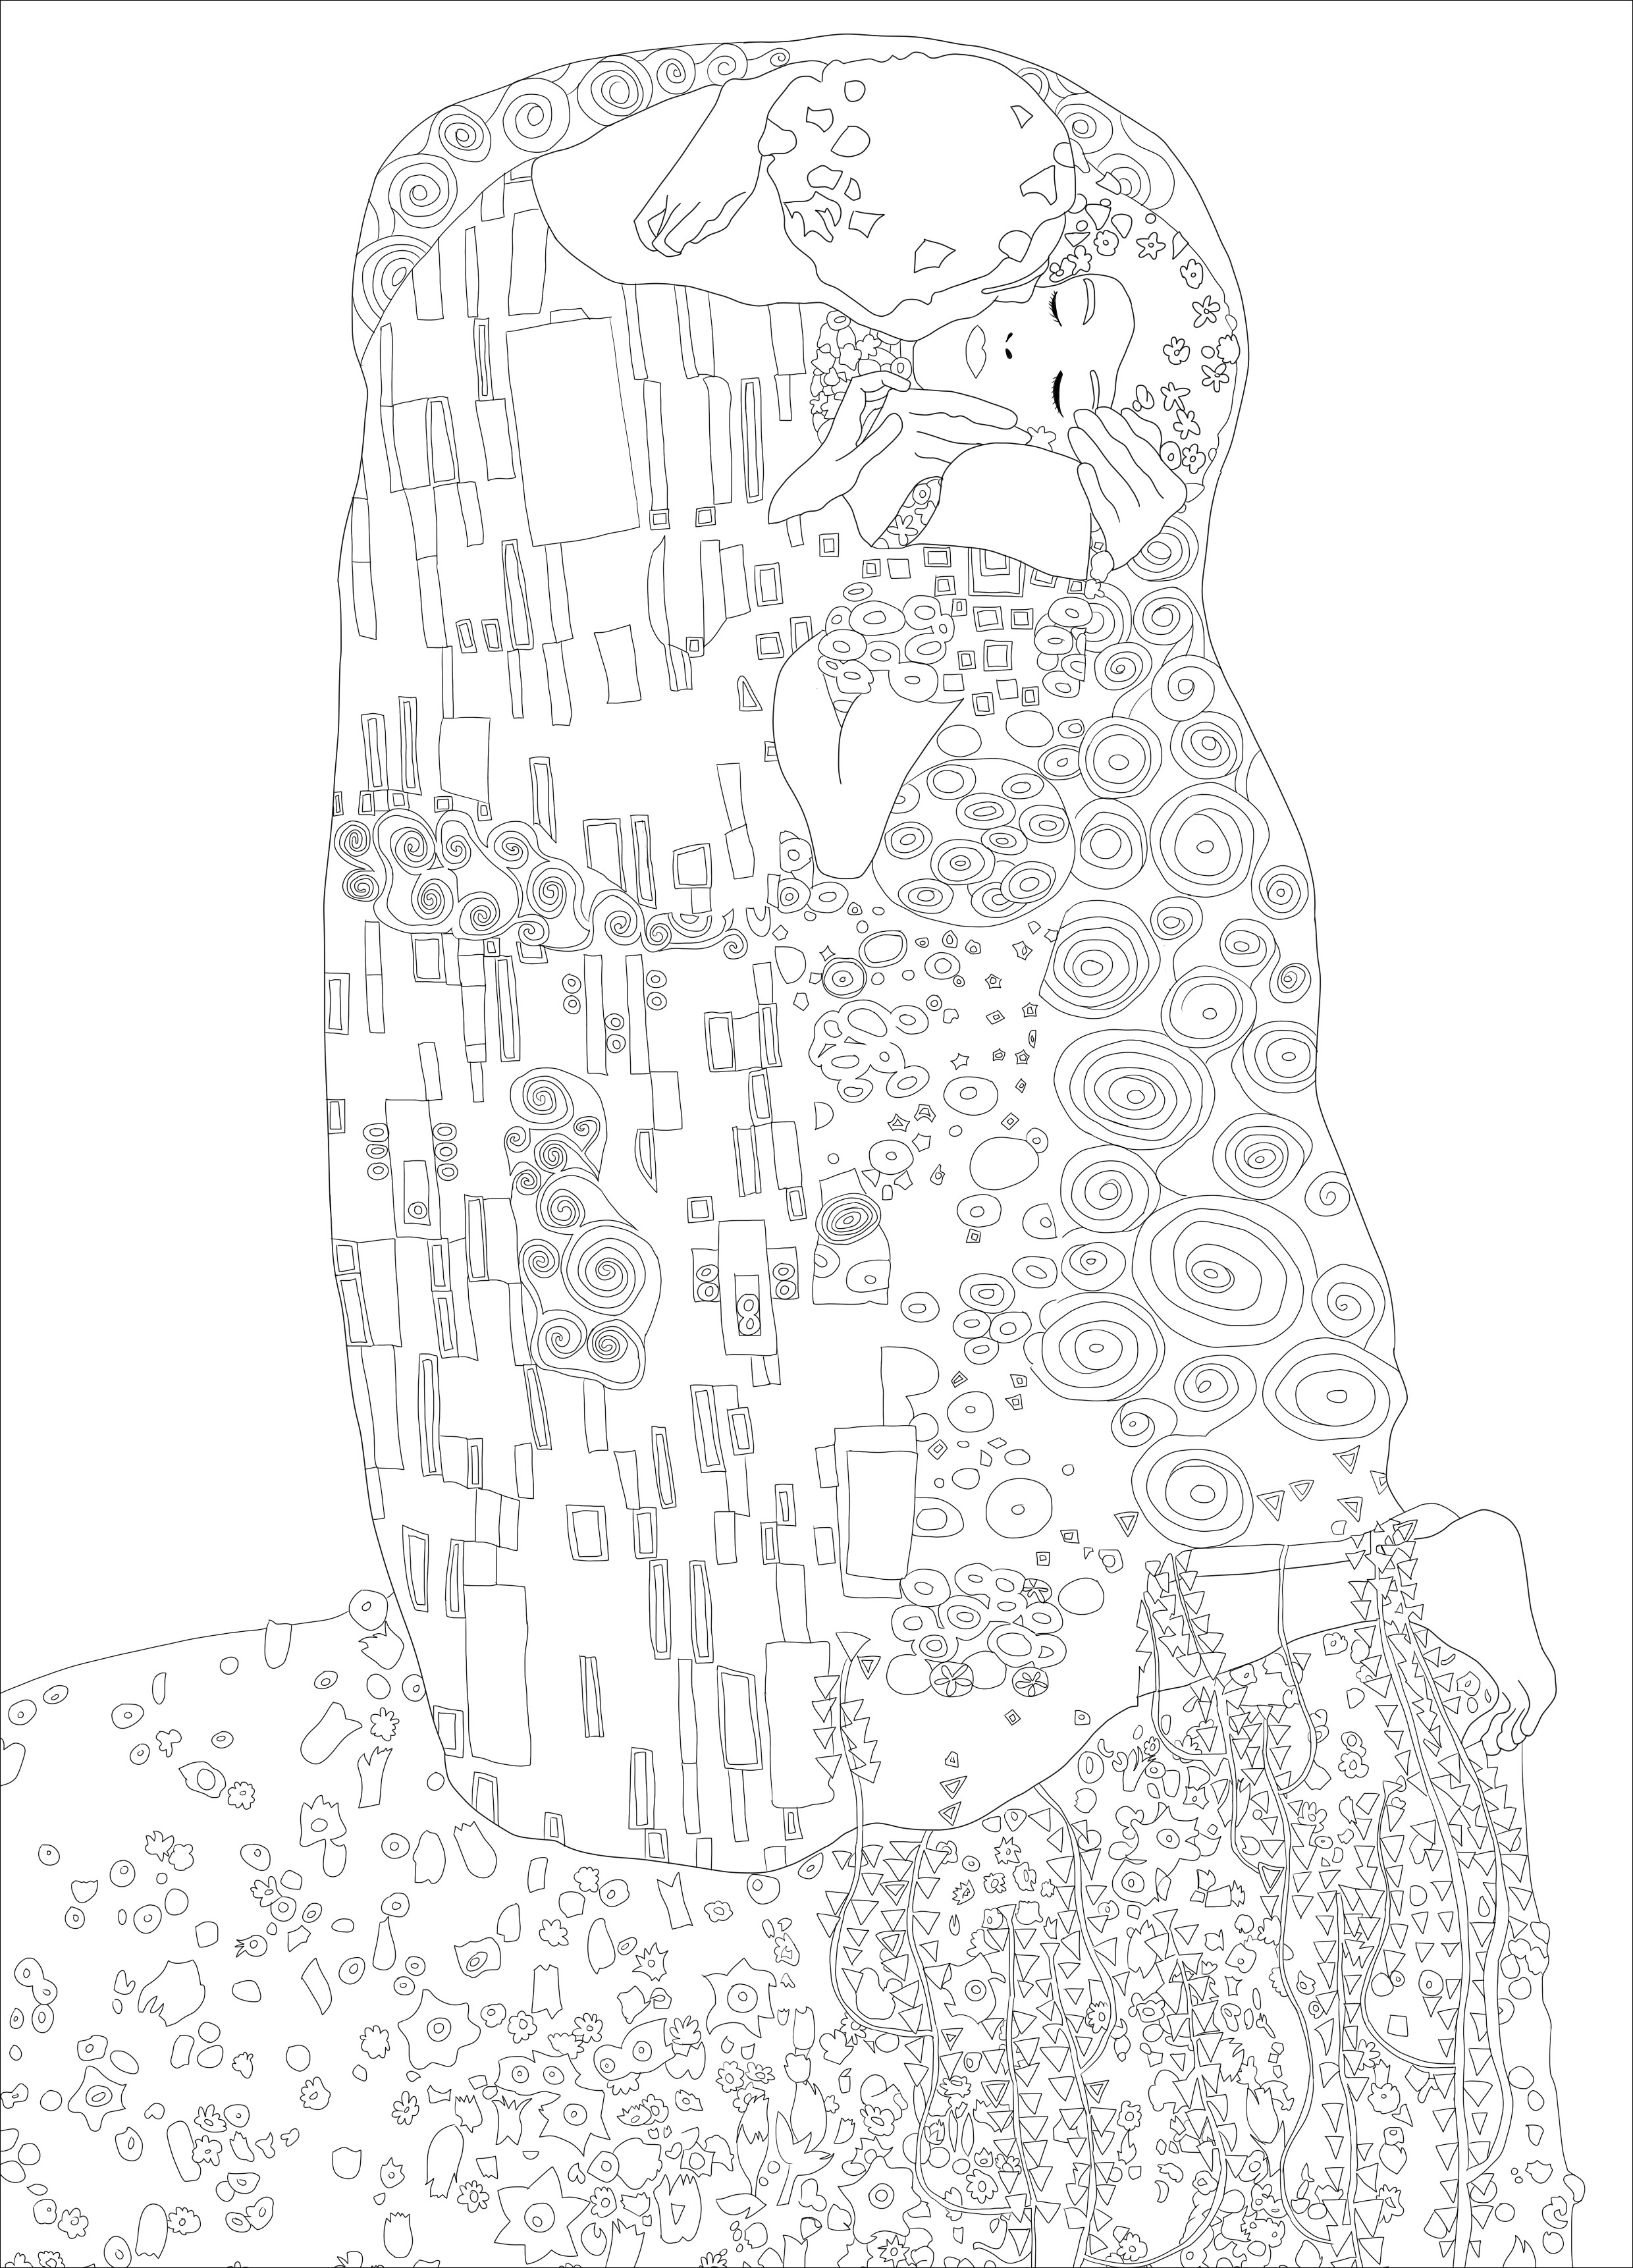 Coloring page created from the painting 'The Kiss' by Gustav Klimt